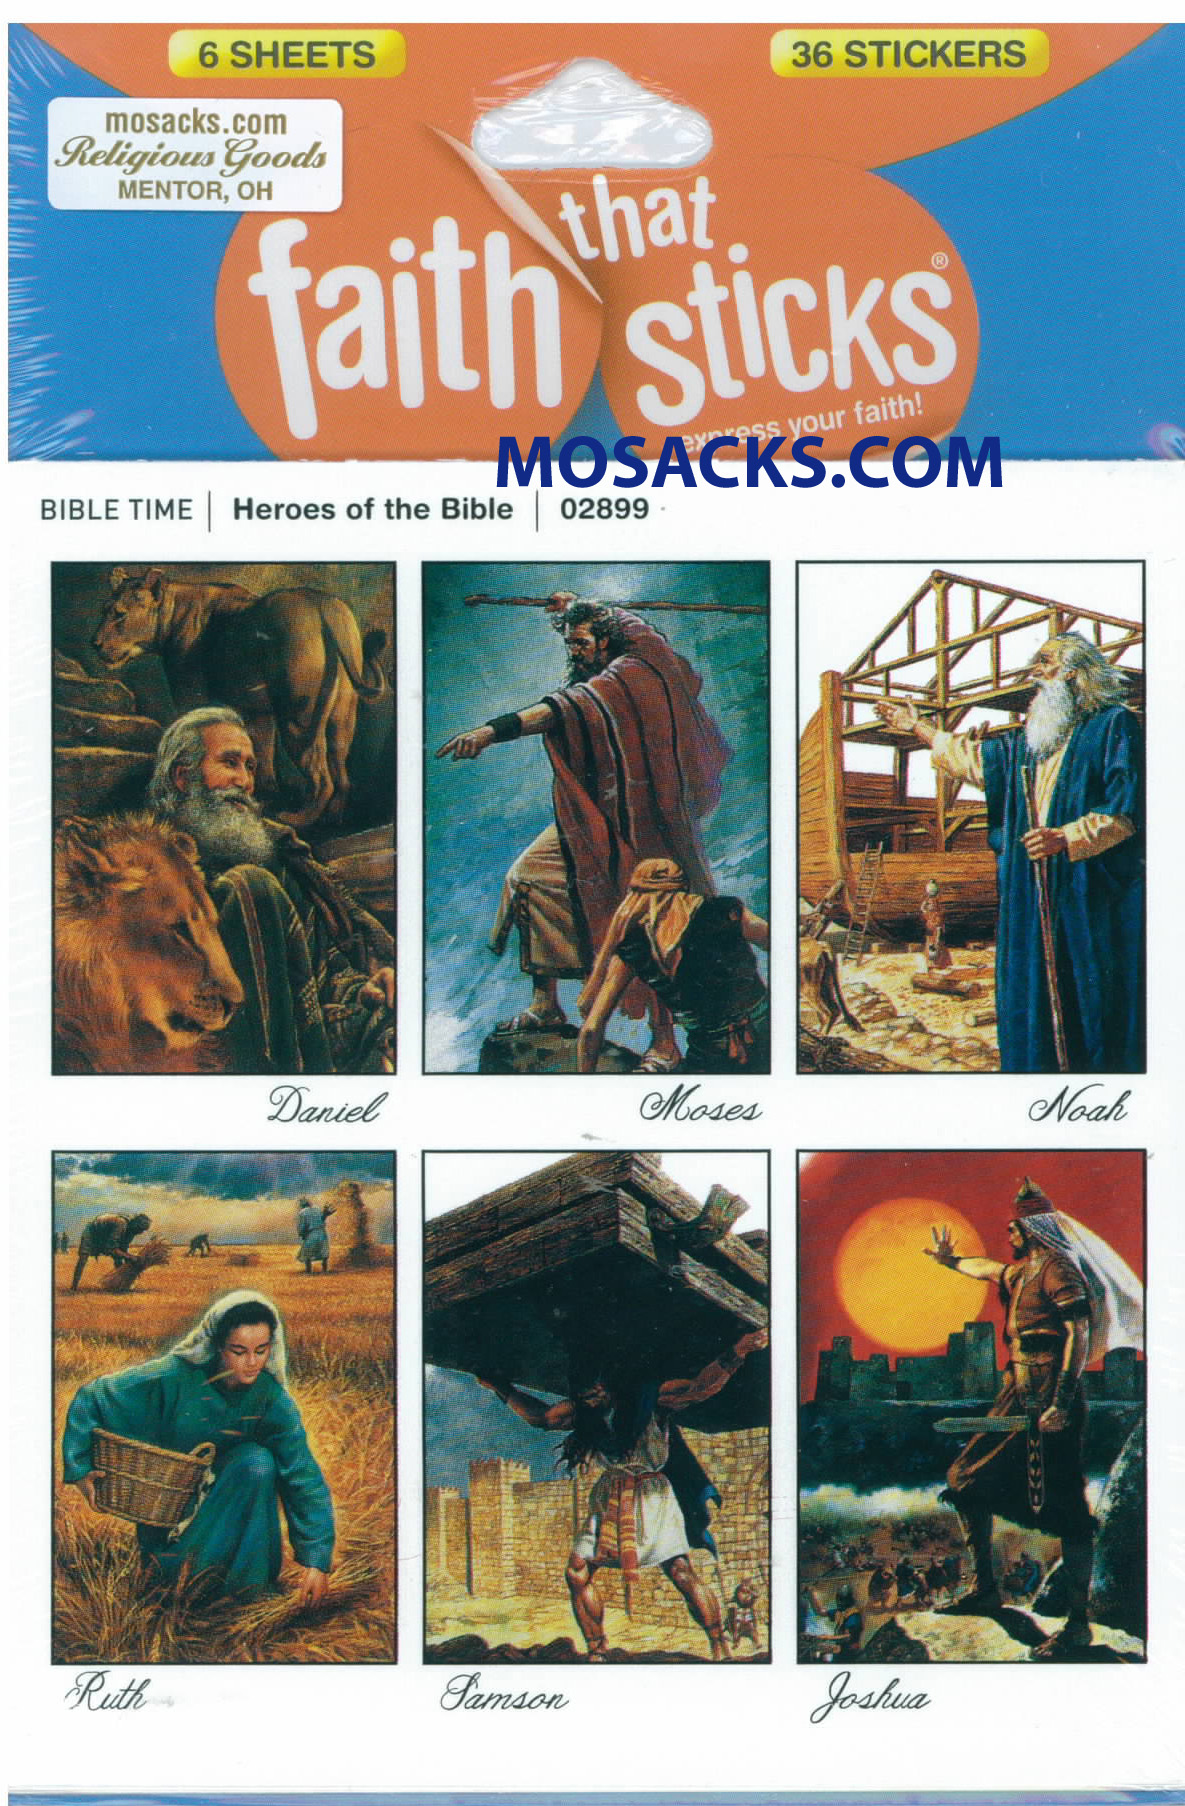 Christian Stickers & Catholic Stickers Faith That Sticks Heroes Of The Bible 87-02899 includes 6 Heroes of the Bible sticker sheets